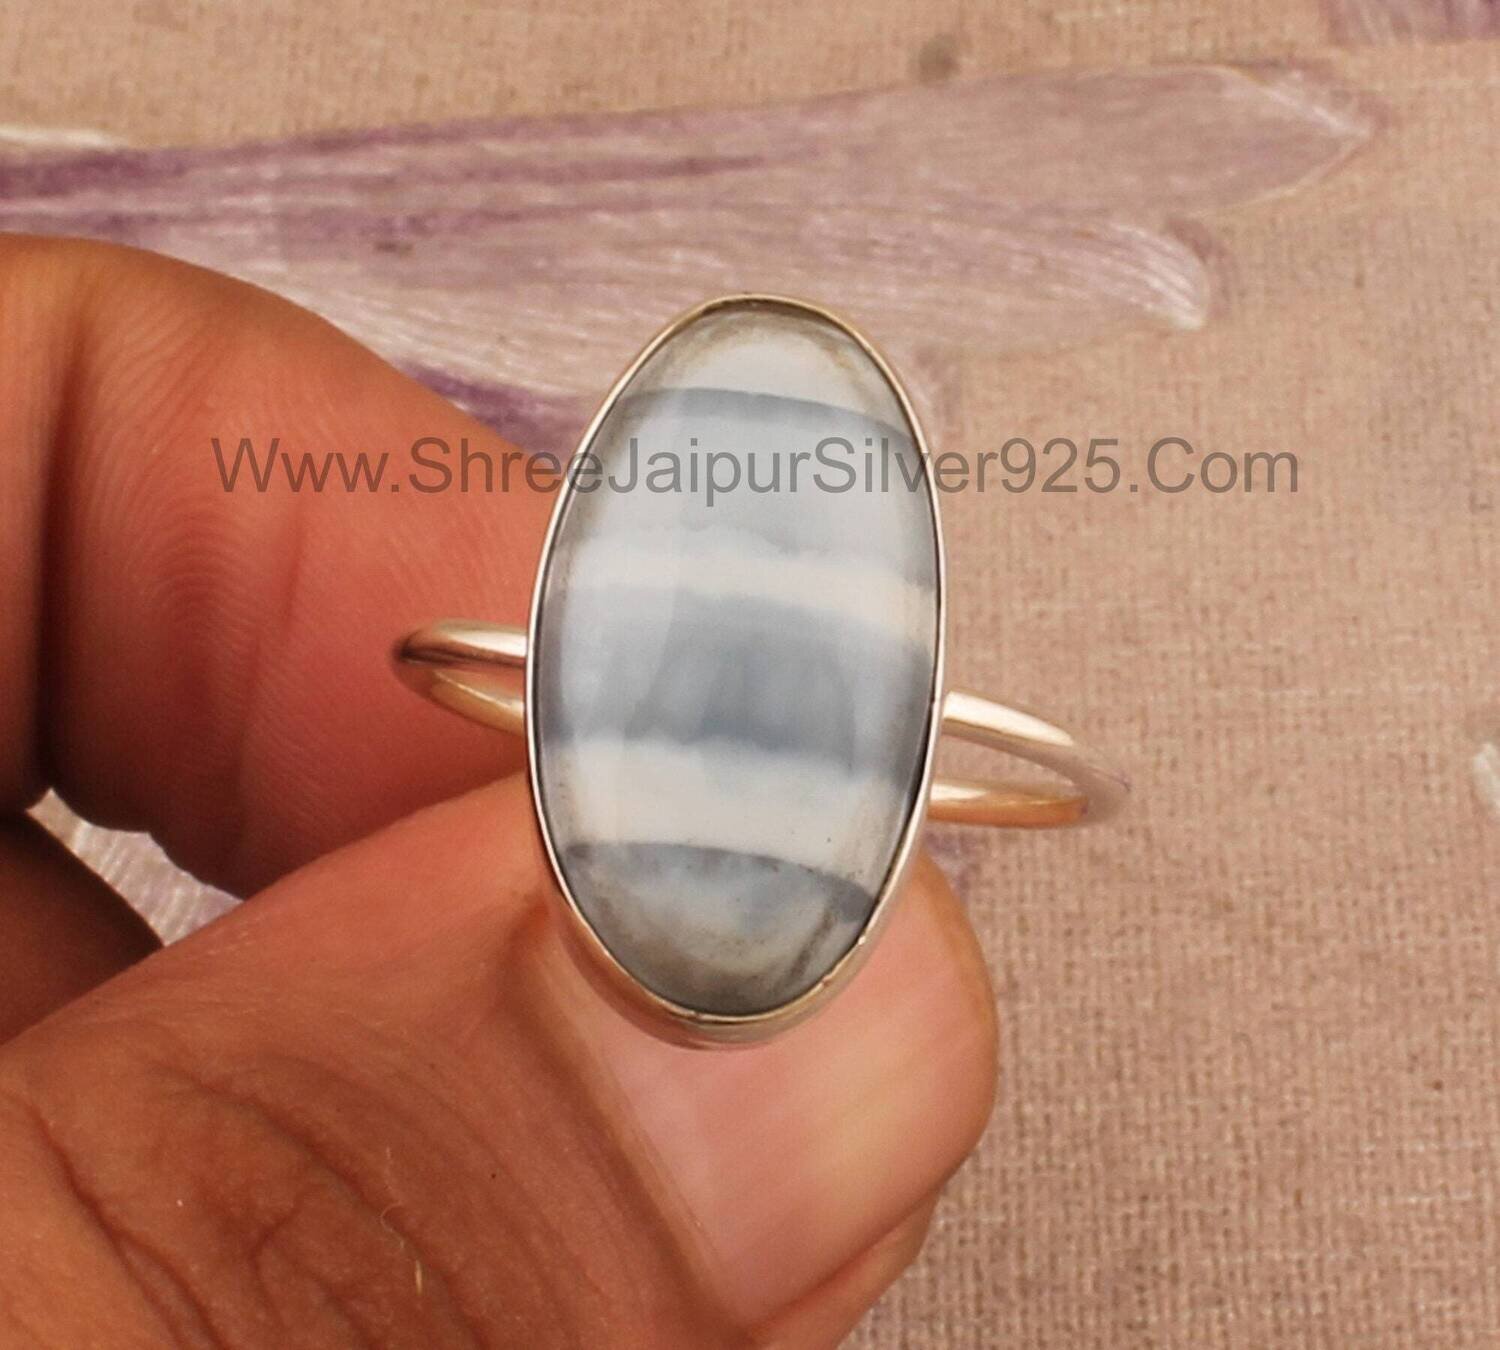 Natural Blue Opal Oval Shape Gemstone Ring, 925 Sterling Silver Ring, Handmade Everyday Silver Jewelry, Women Wedding Jewelry Gift For Her